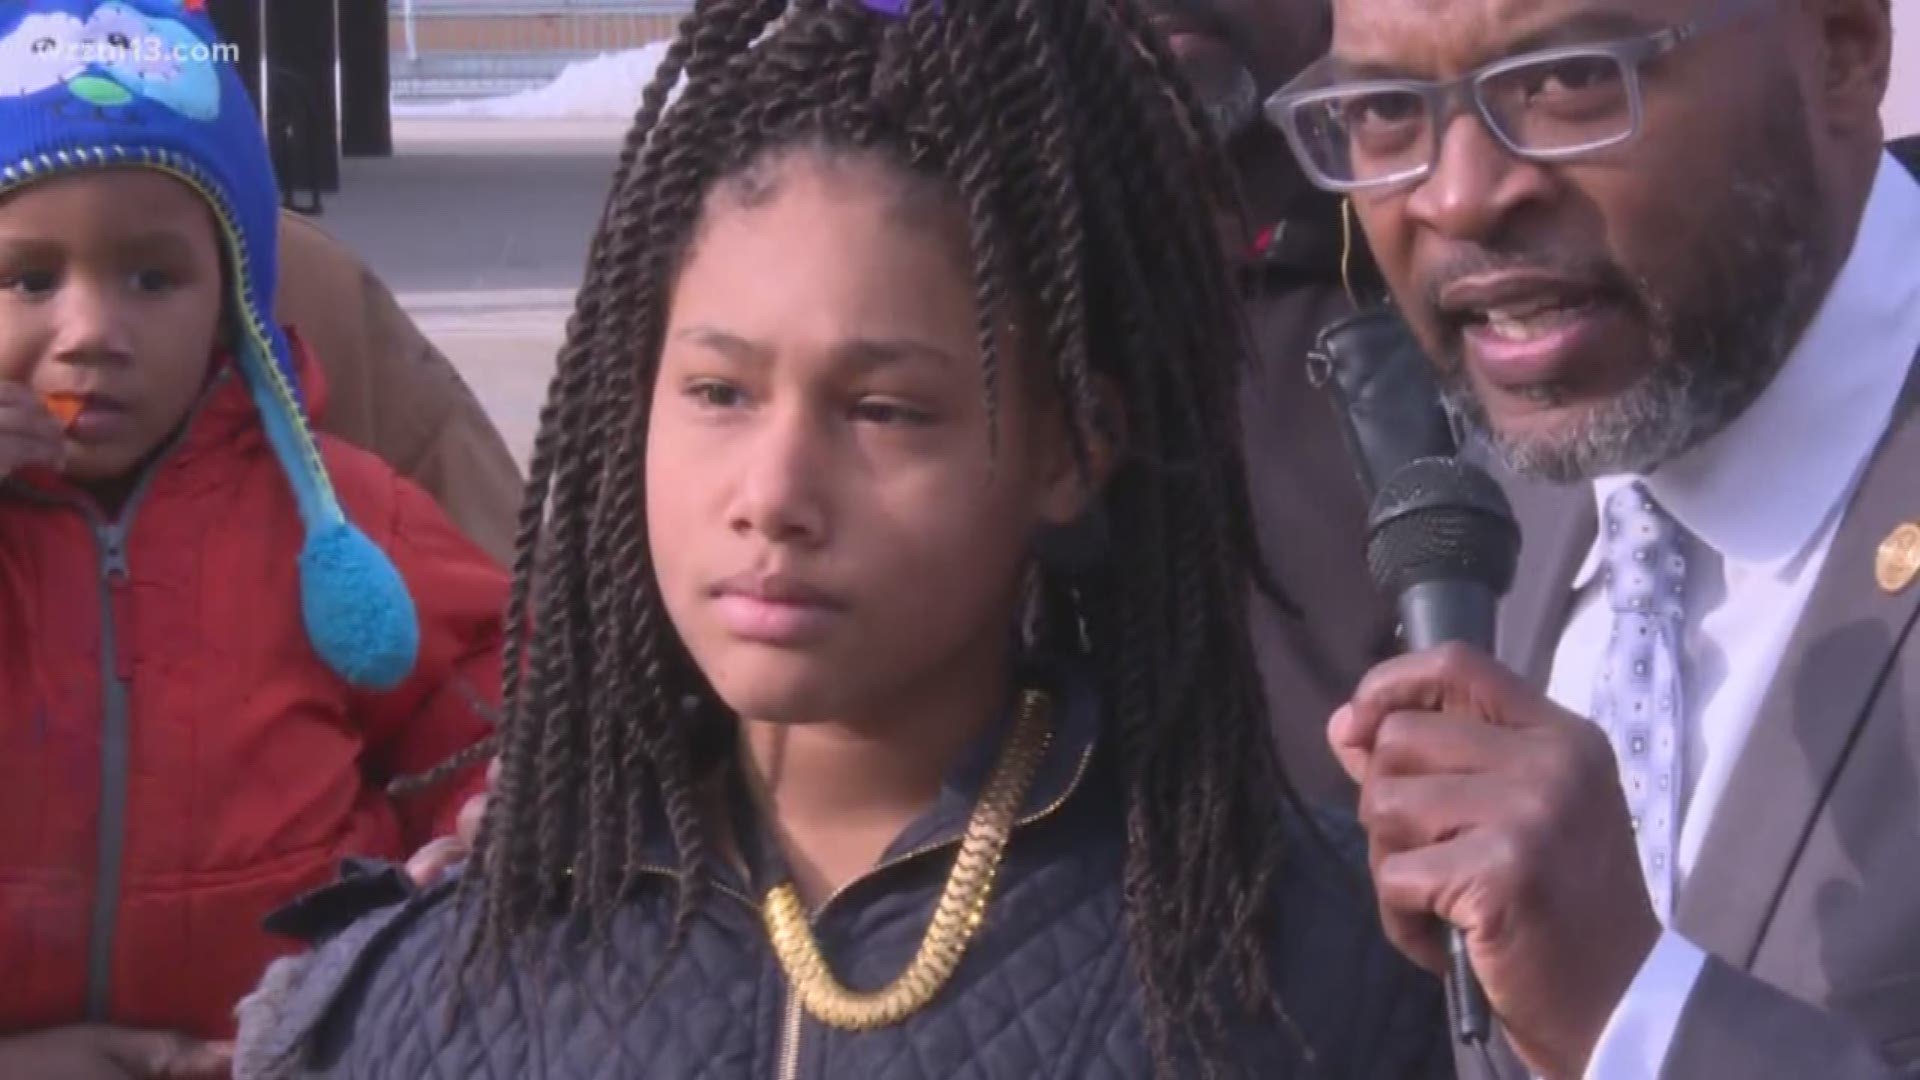 NAACP holds media conference for 11-year-old cuffed